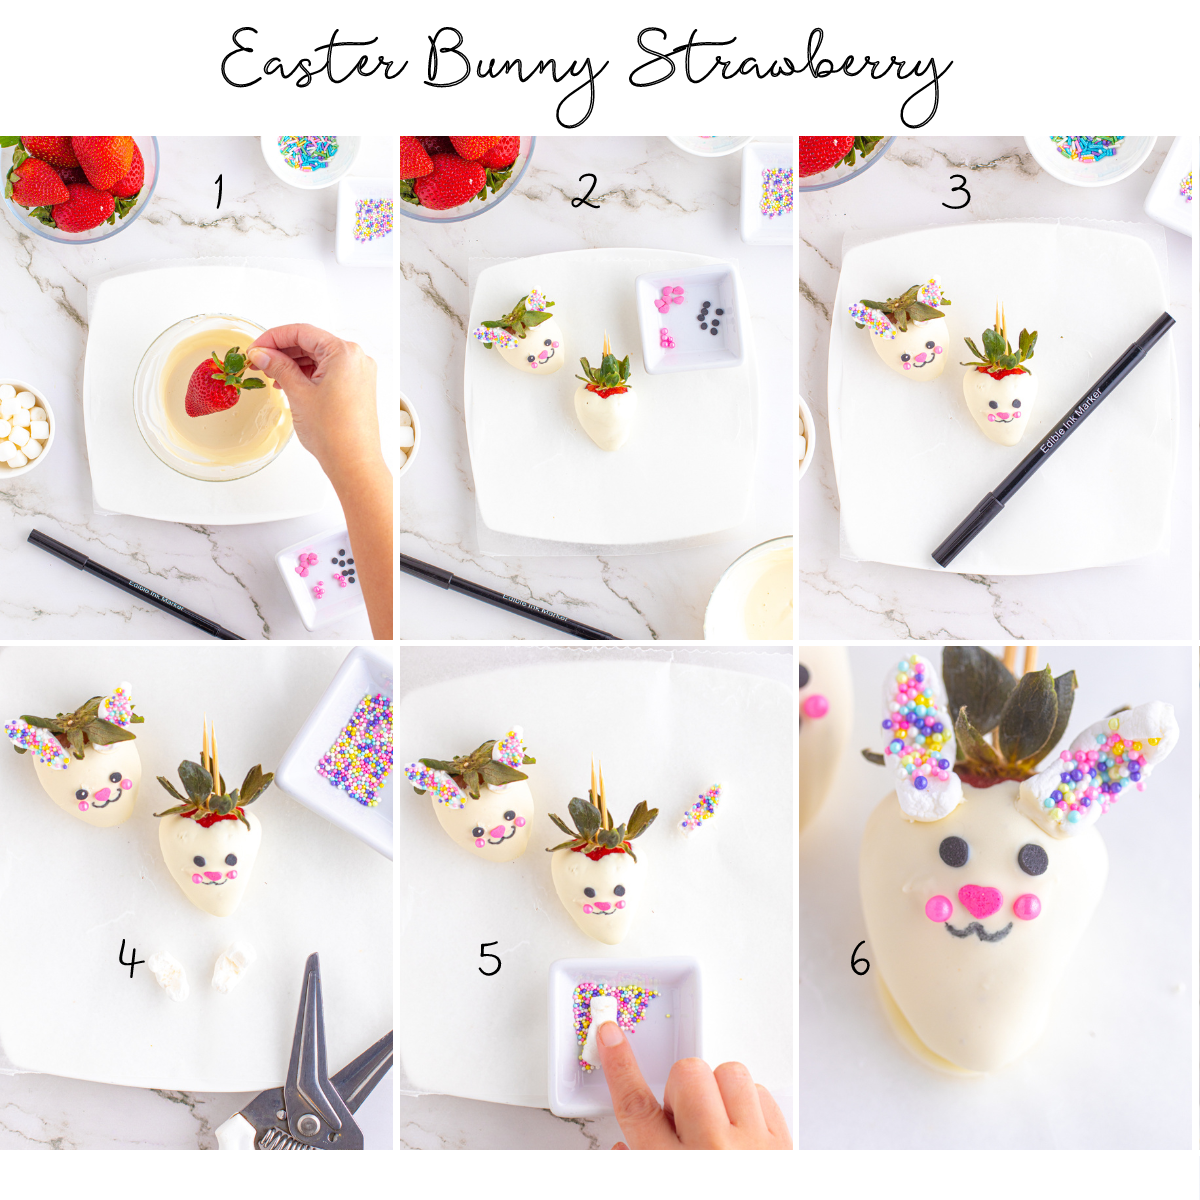 How to make an Easter Bunny Strawberry step by step.